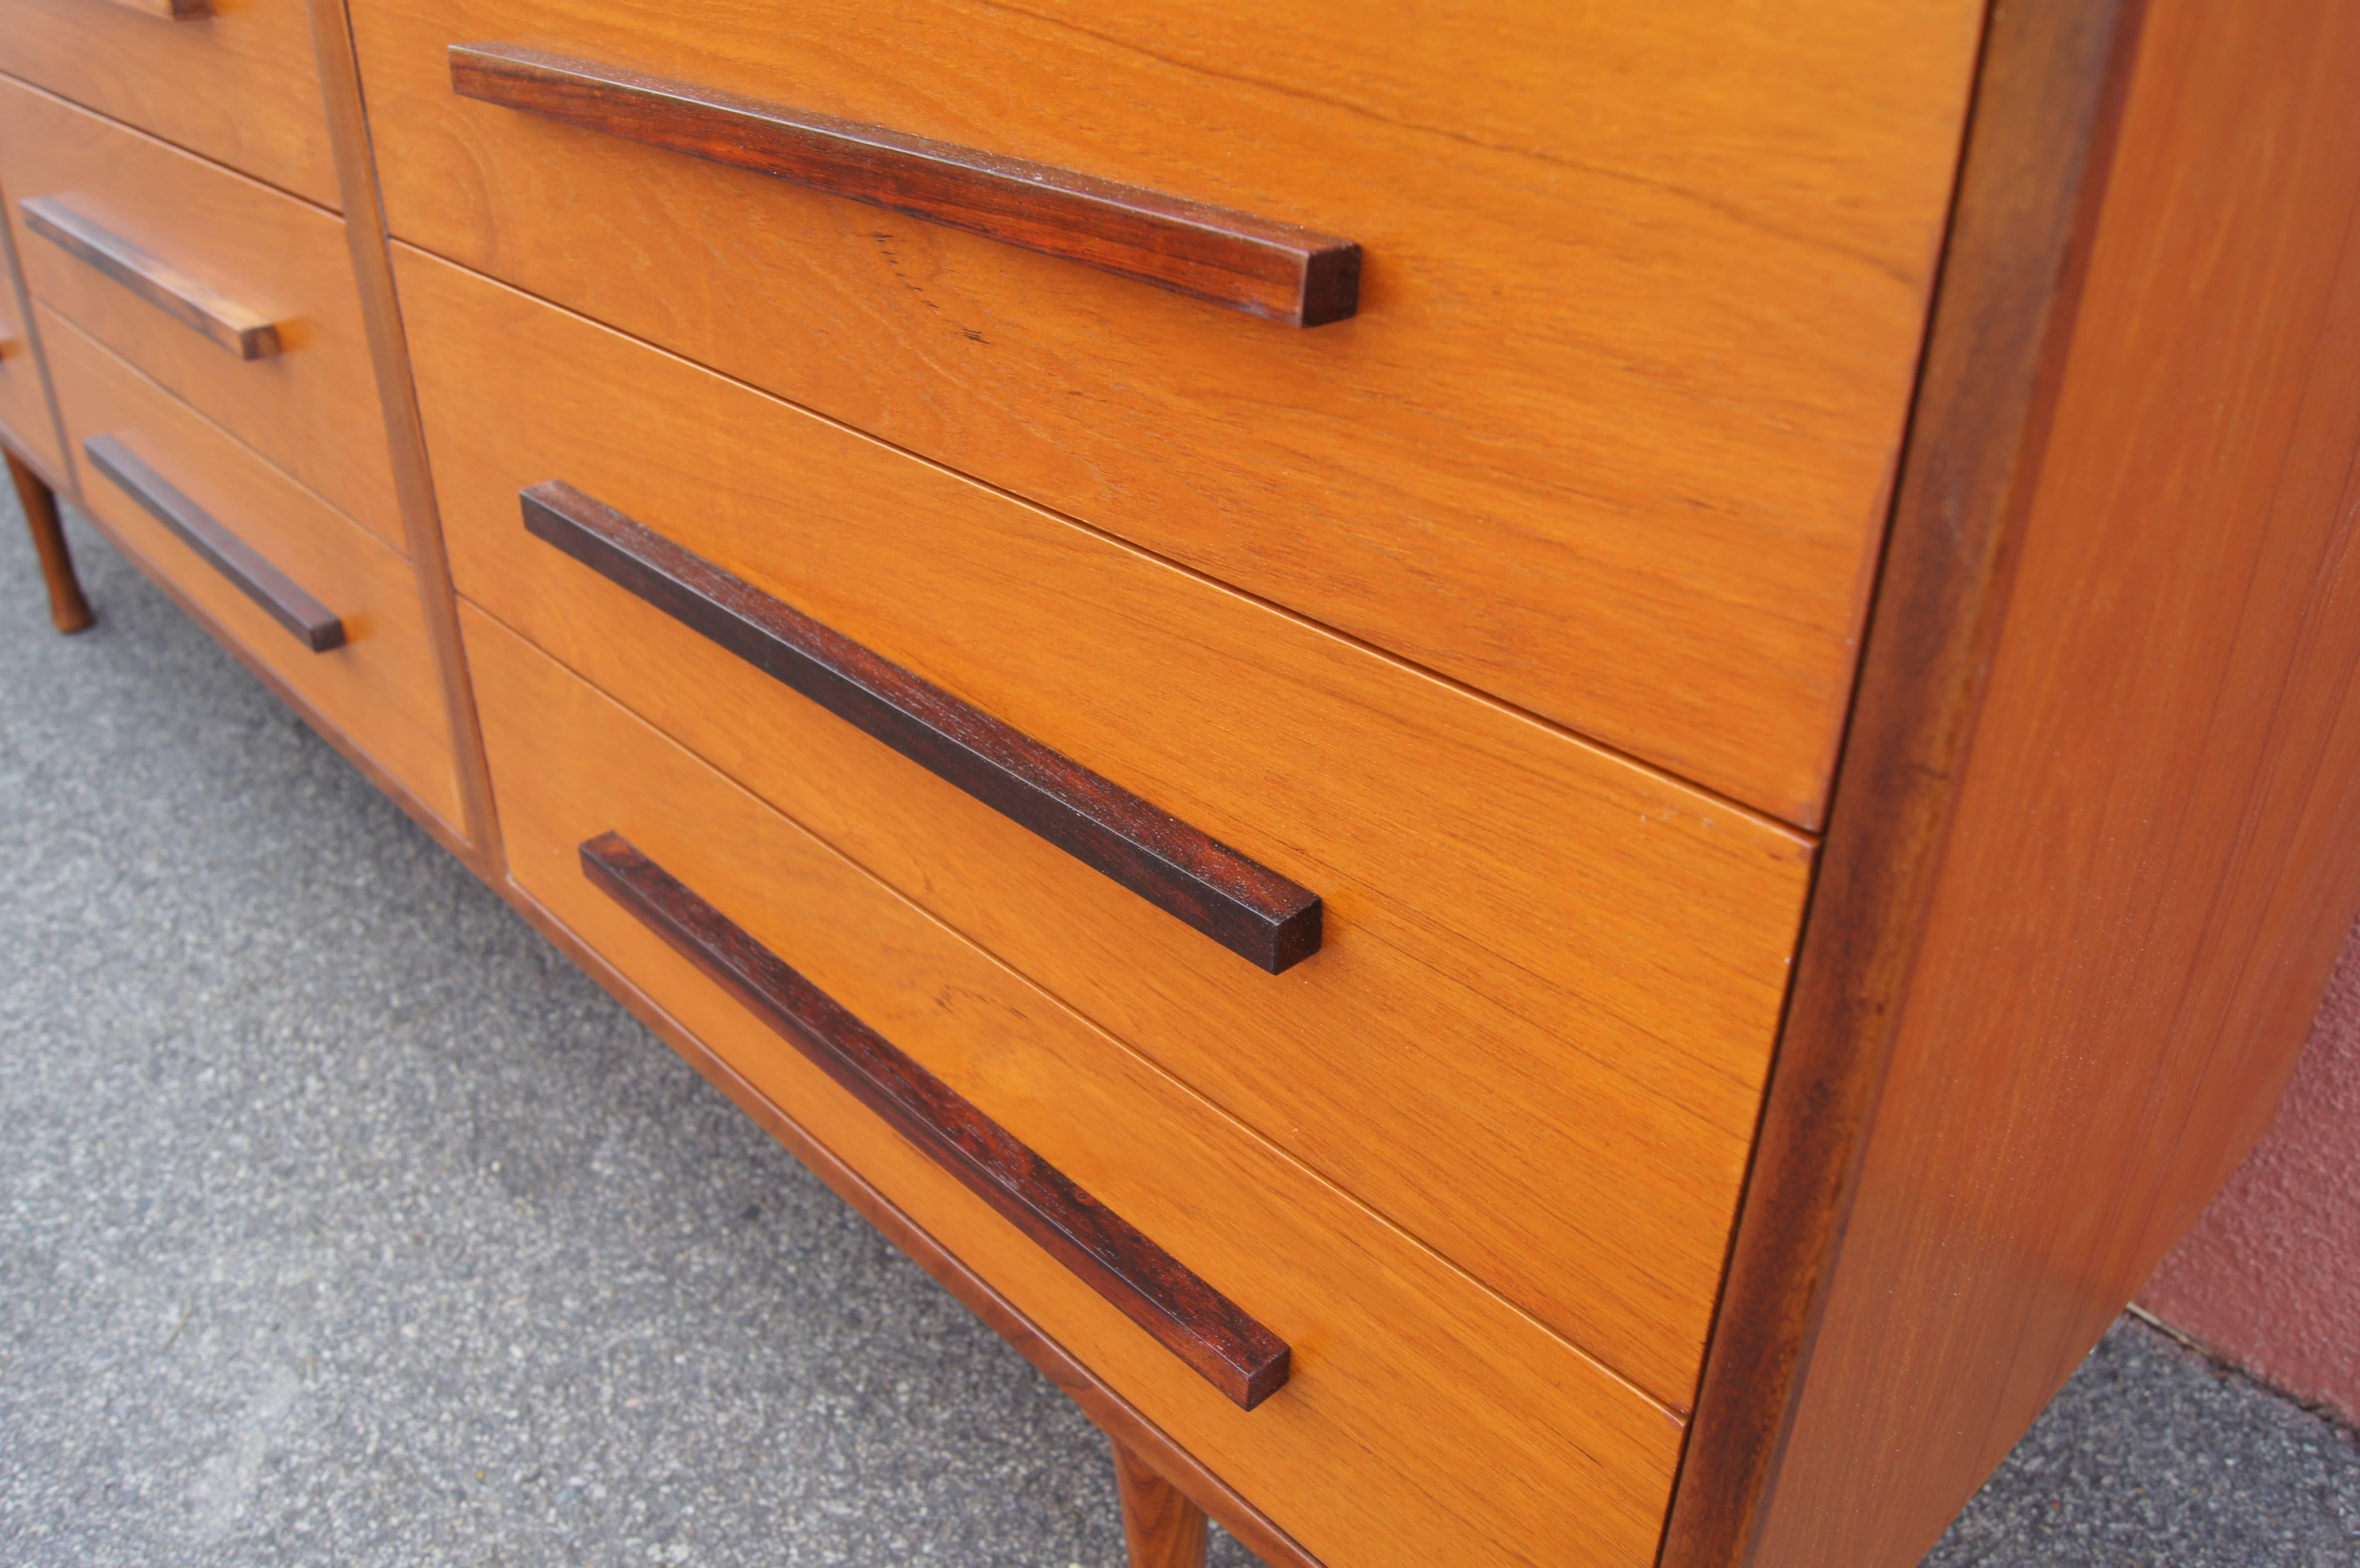 This fabulous Danish modern dresser surrounds a teak case on a plinth base with a rosewood frame. Contrasting rosewood pulls on the nine drawers emphasize its regularity and linearity.

 